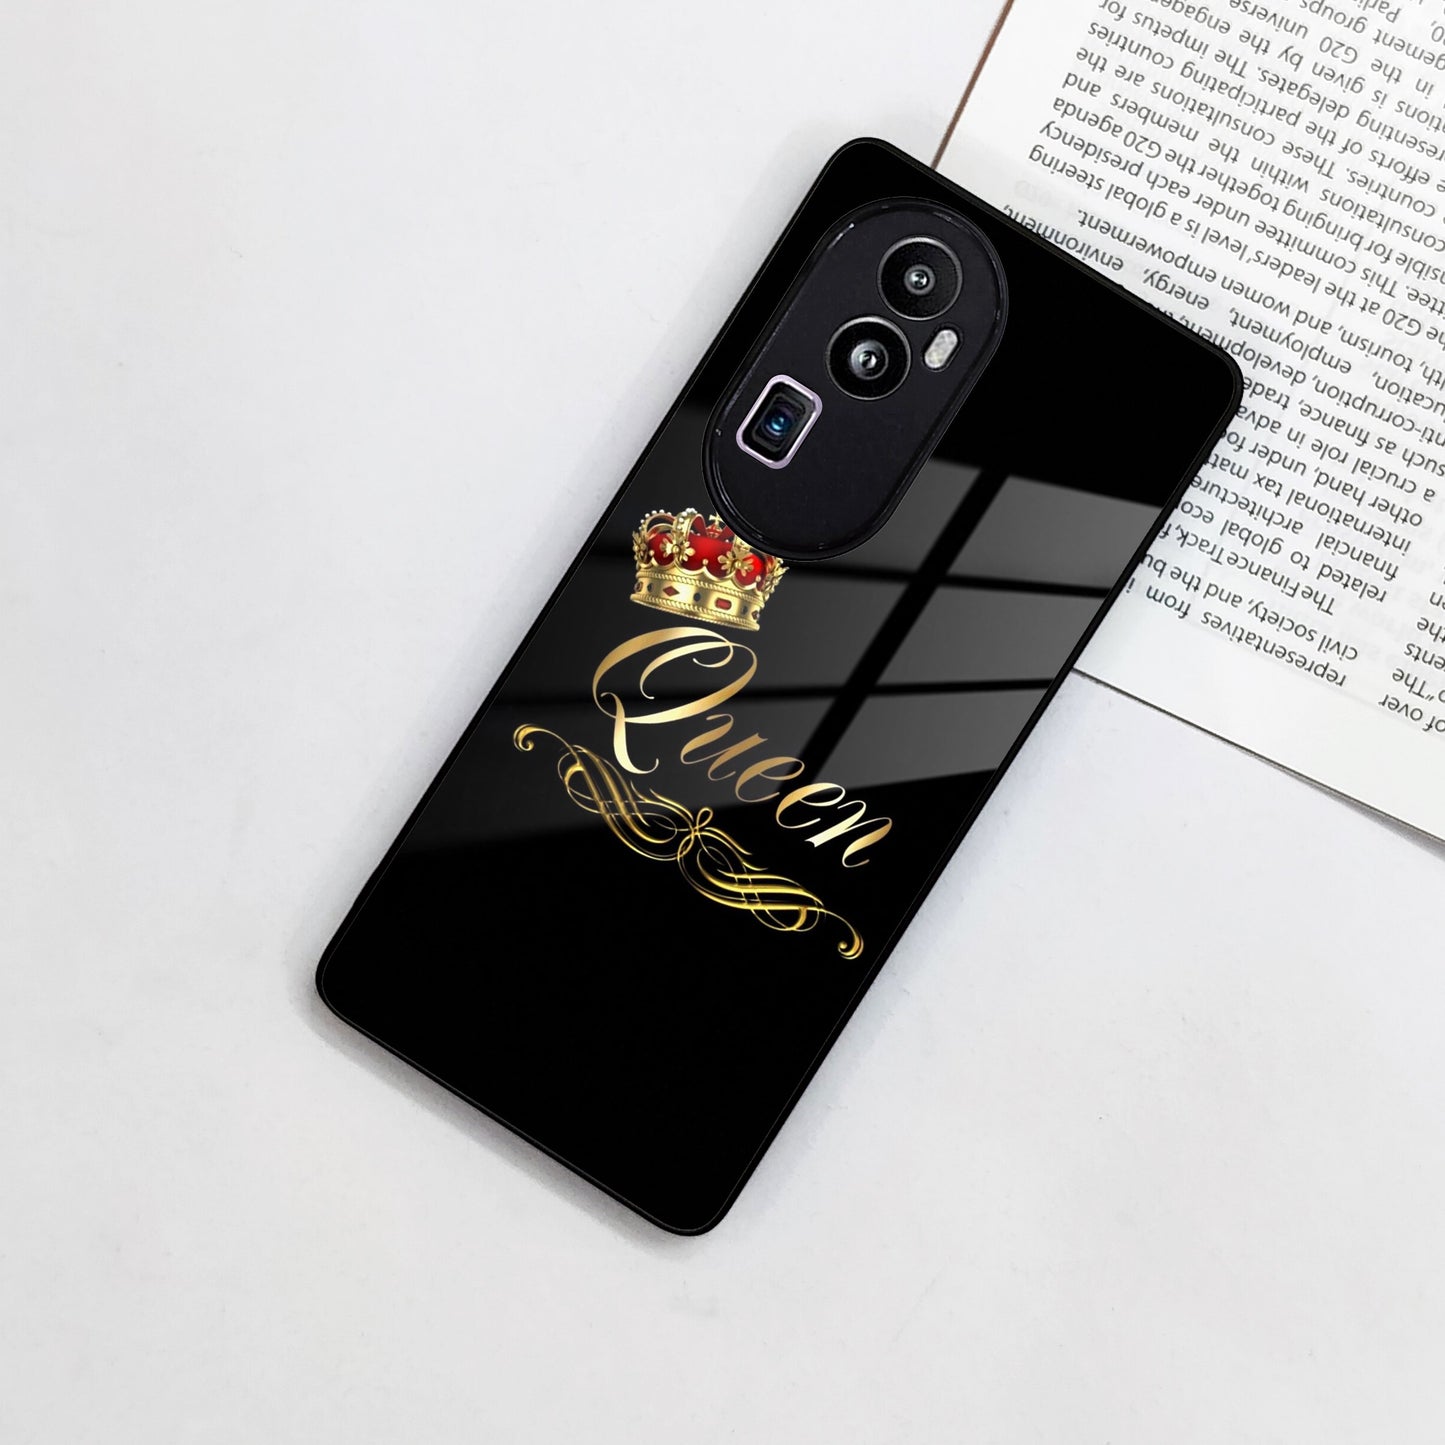 Cute Queen With Crown Glass Case For Oppo